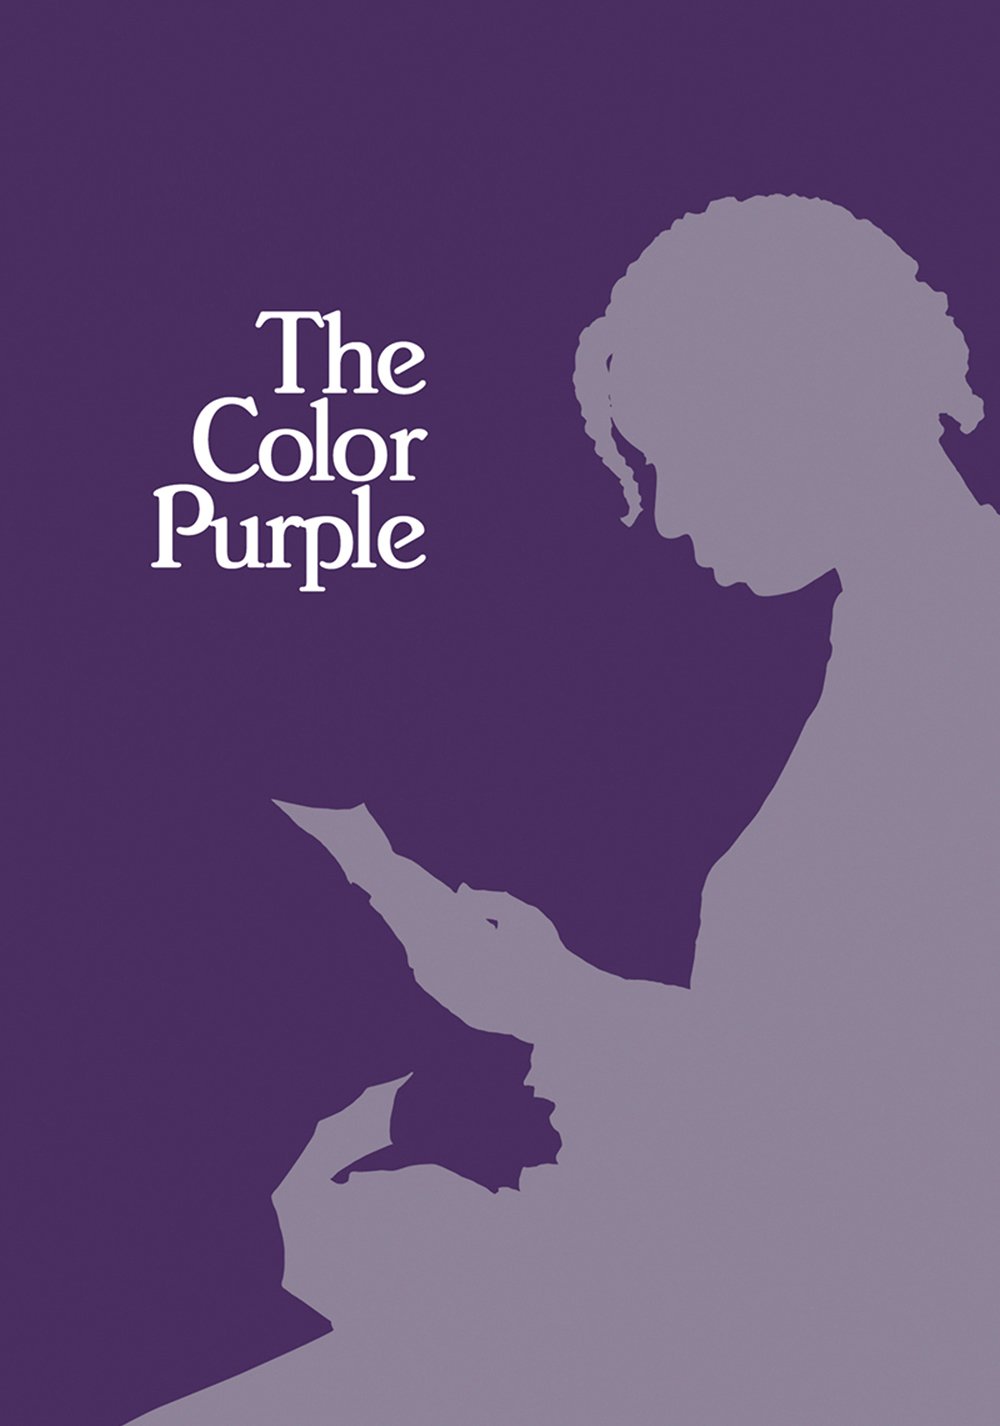 The Color Purple Movie Poster ID 134209 Image Abyss